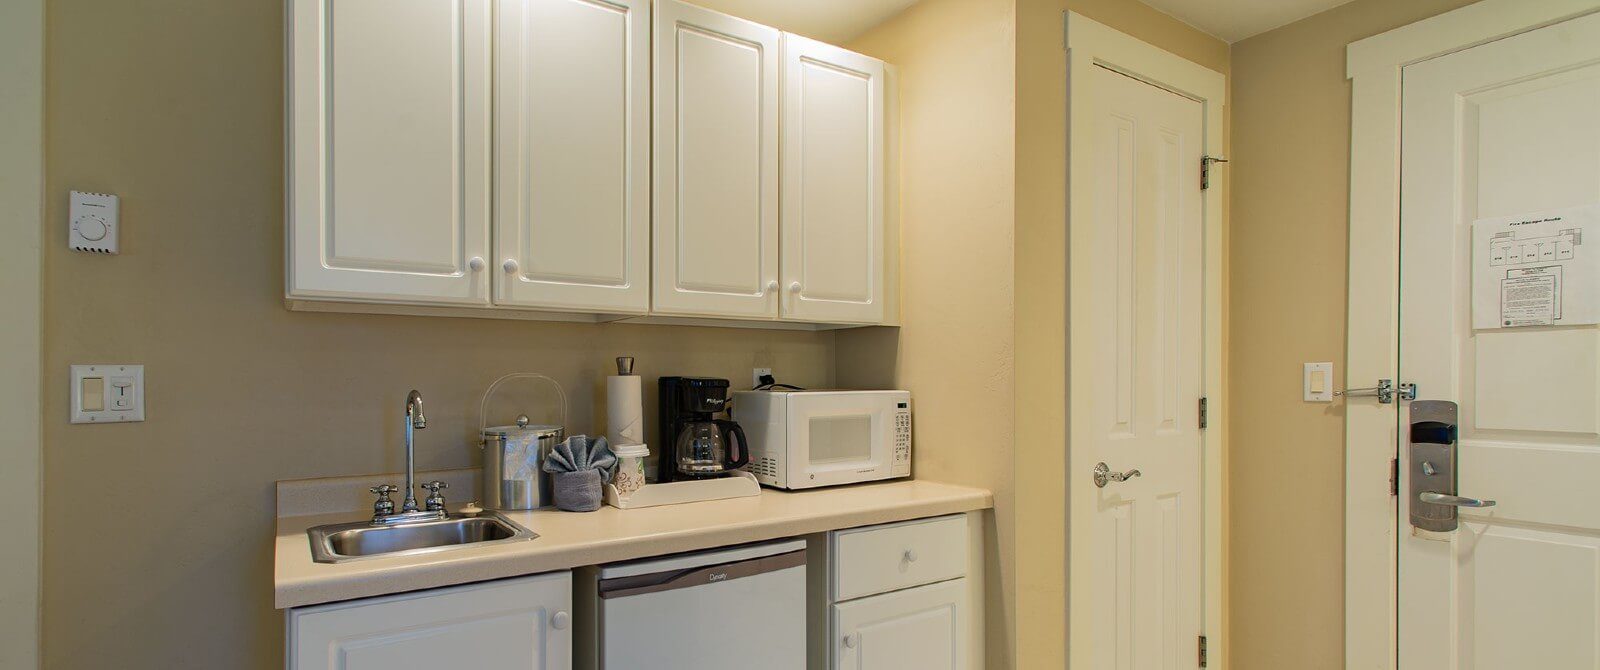 White kitchenette with upper and lower cabinets, sink, microwave and coffee maker